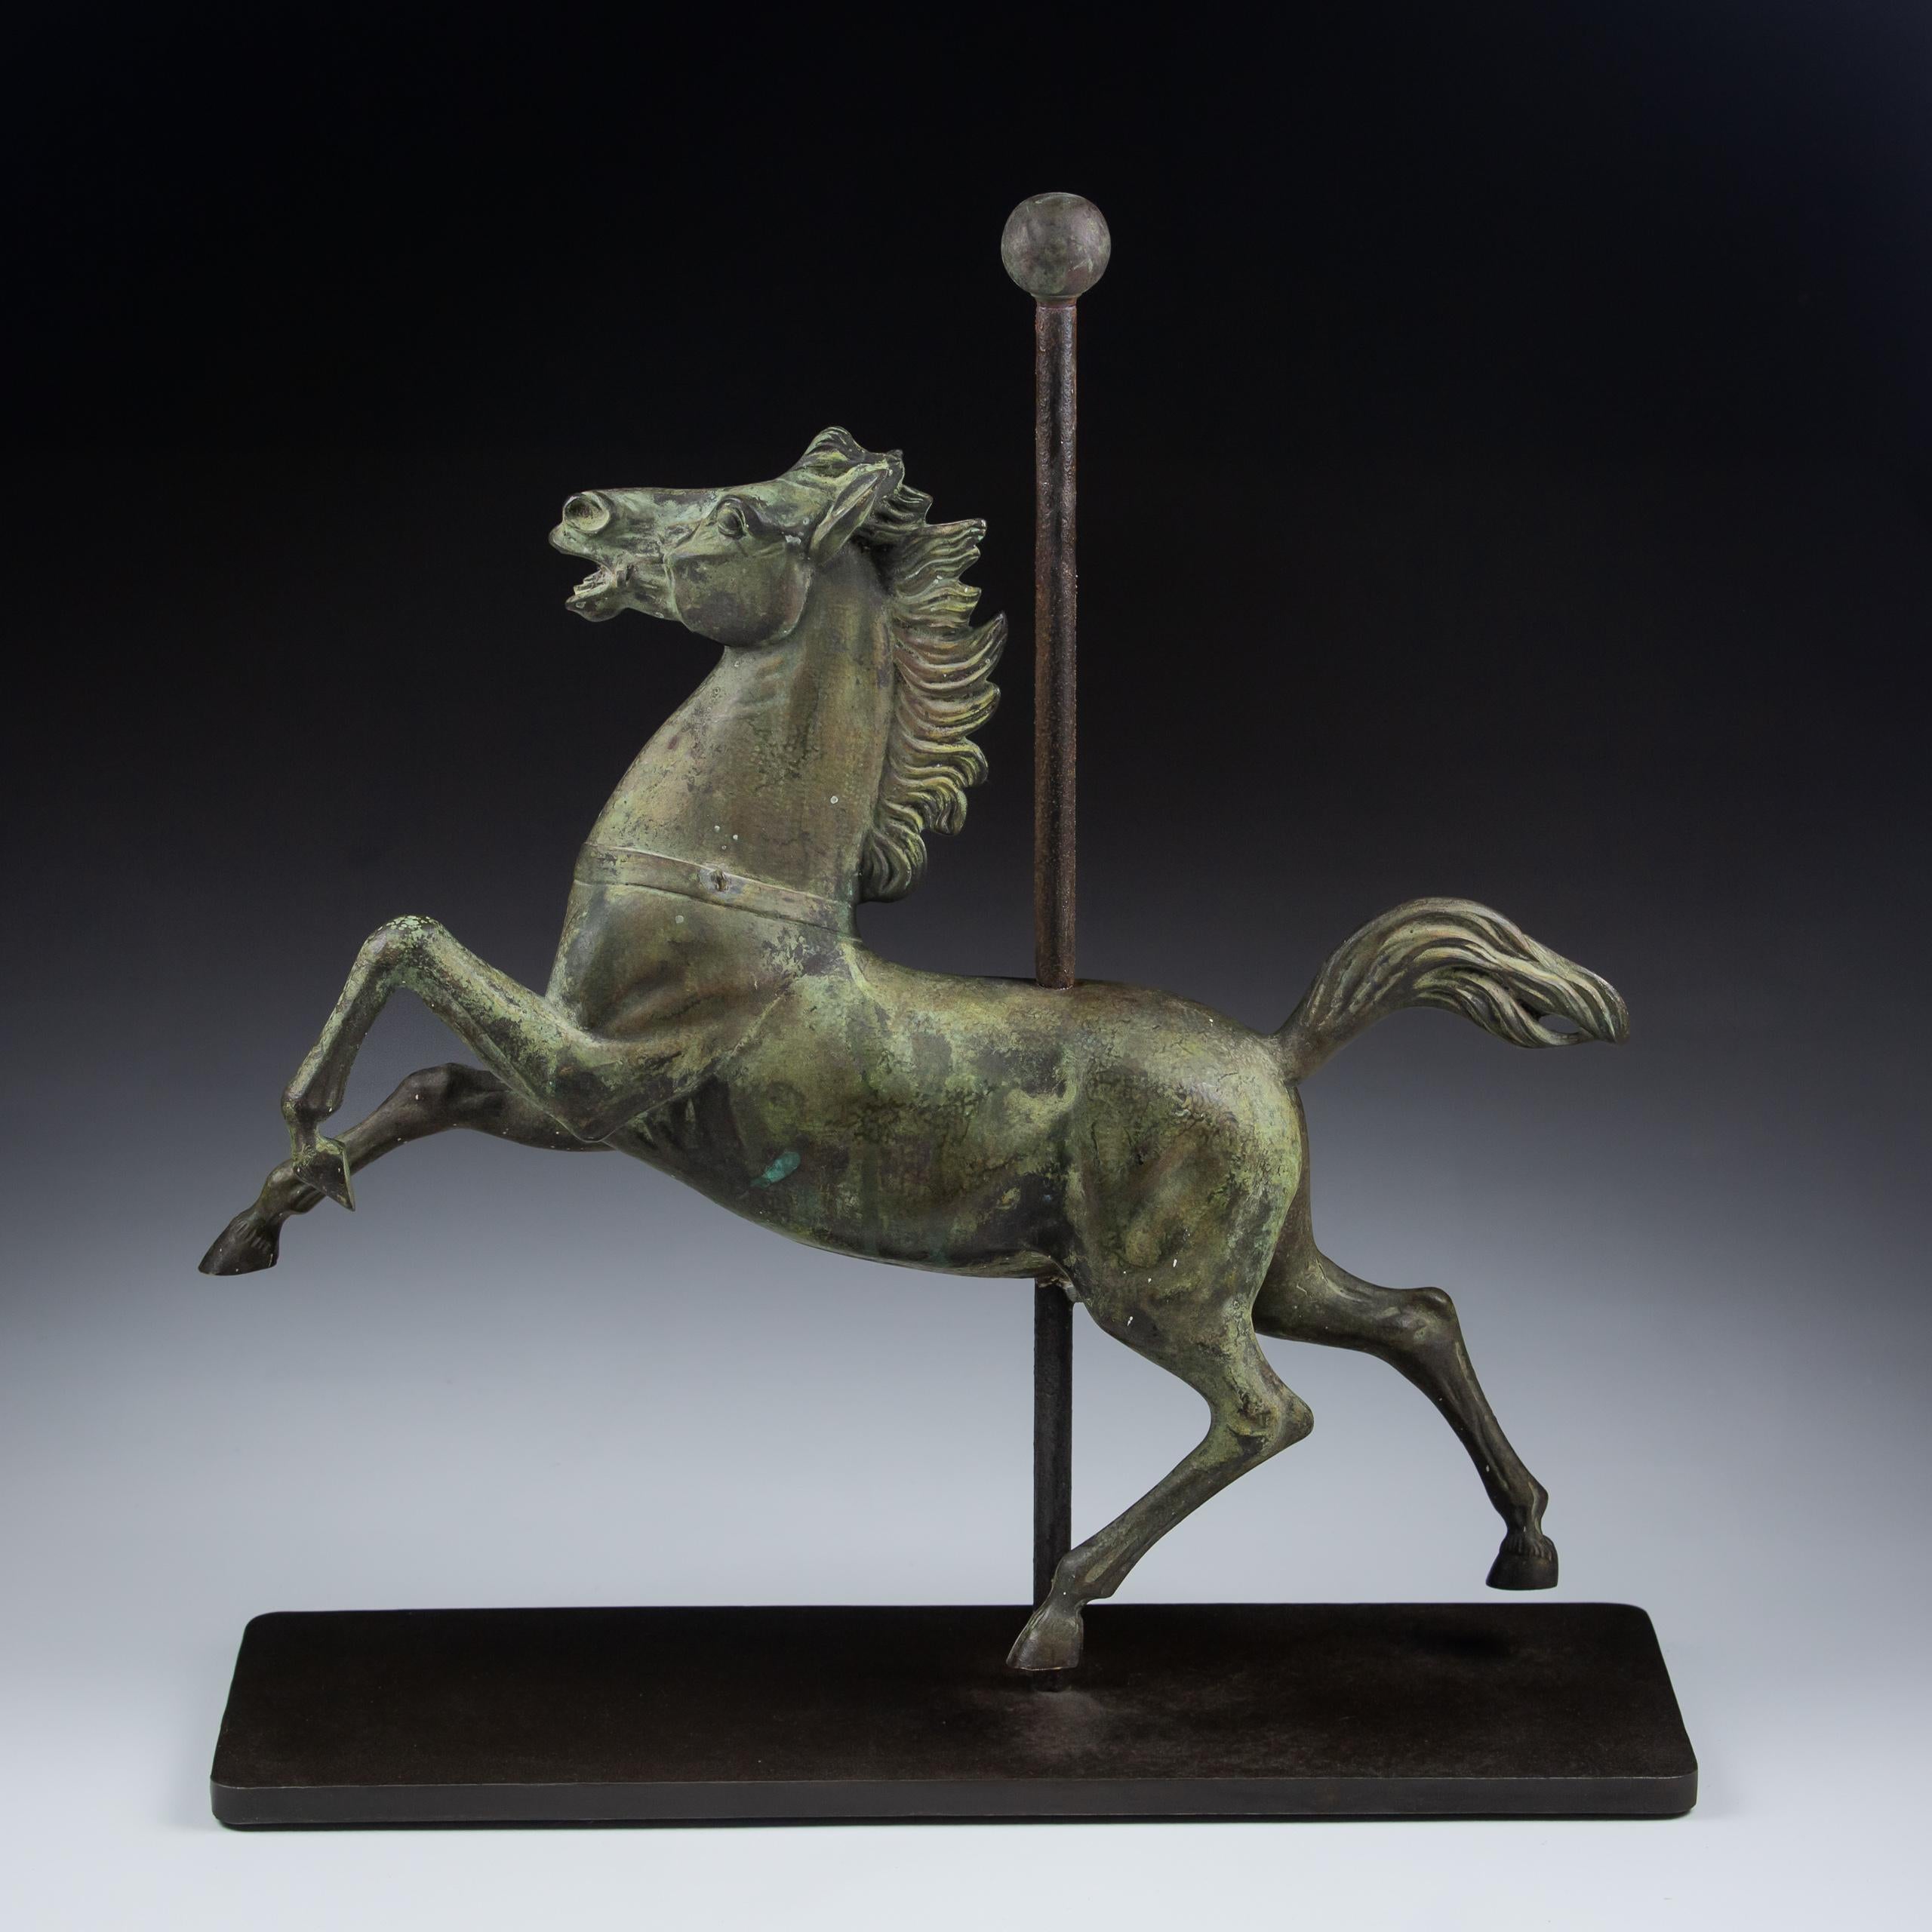 Epi de faitage or finial by repute from one of the grandest equestrian houses stable blocks in Deauville, France. Clean and crisp casting with an extraordinary movement through the piece. Bronze, with natural verdigris patina, remnant